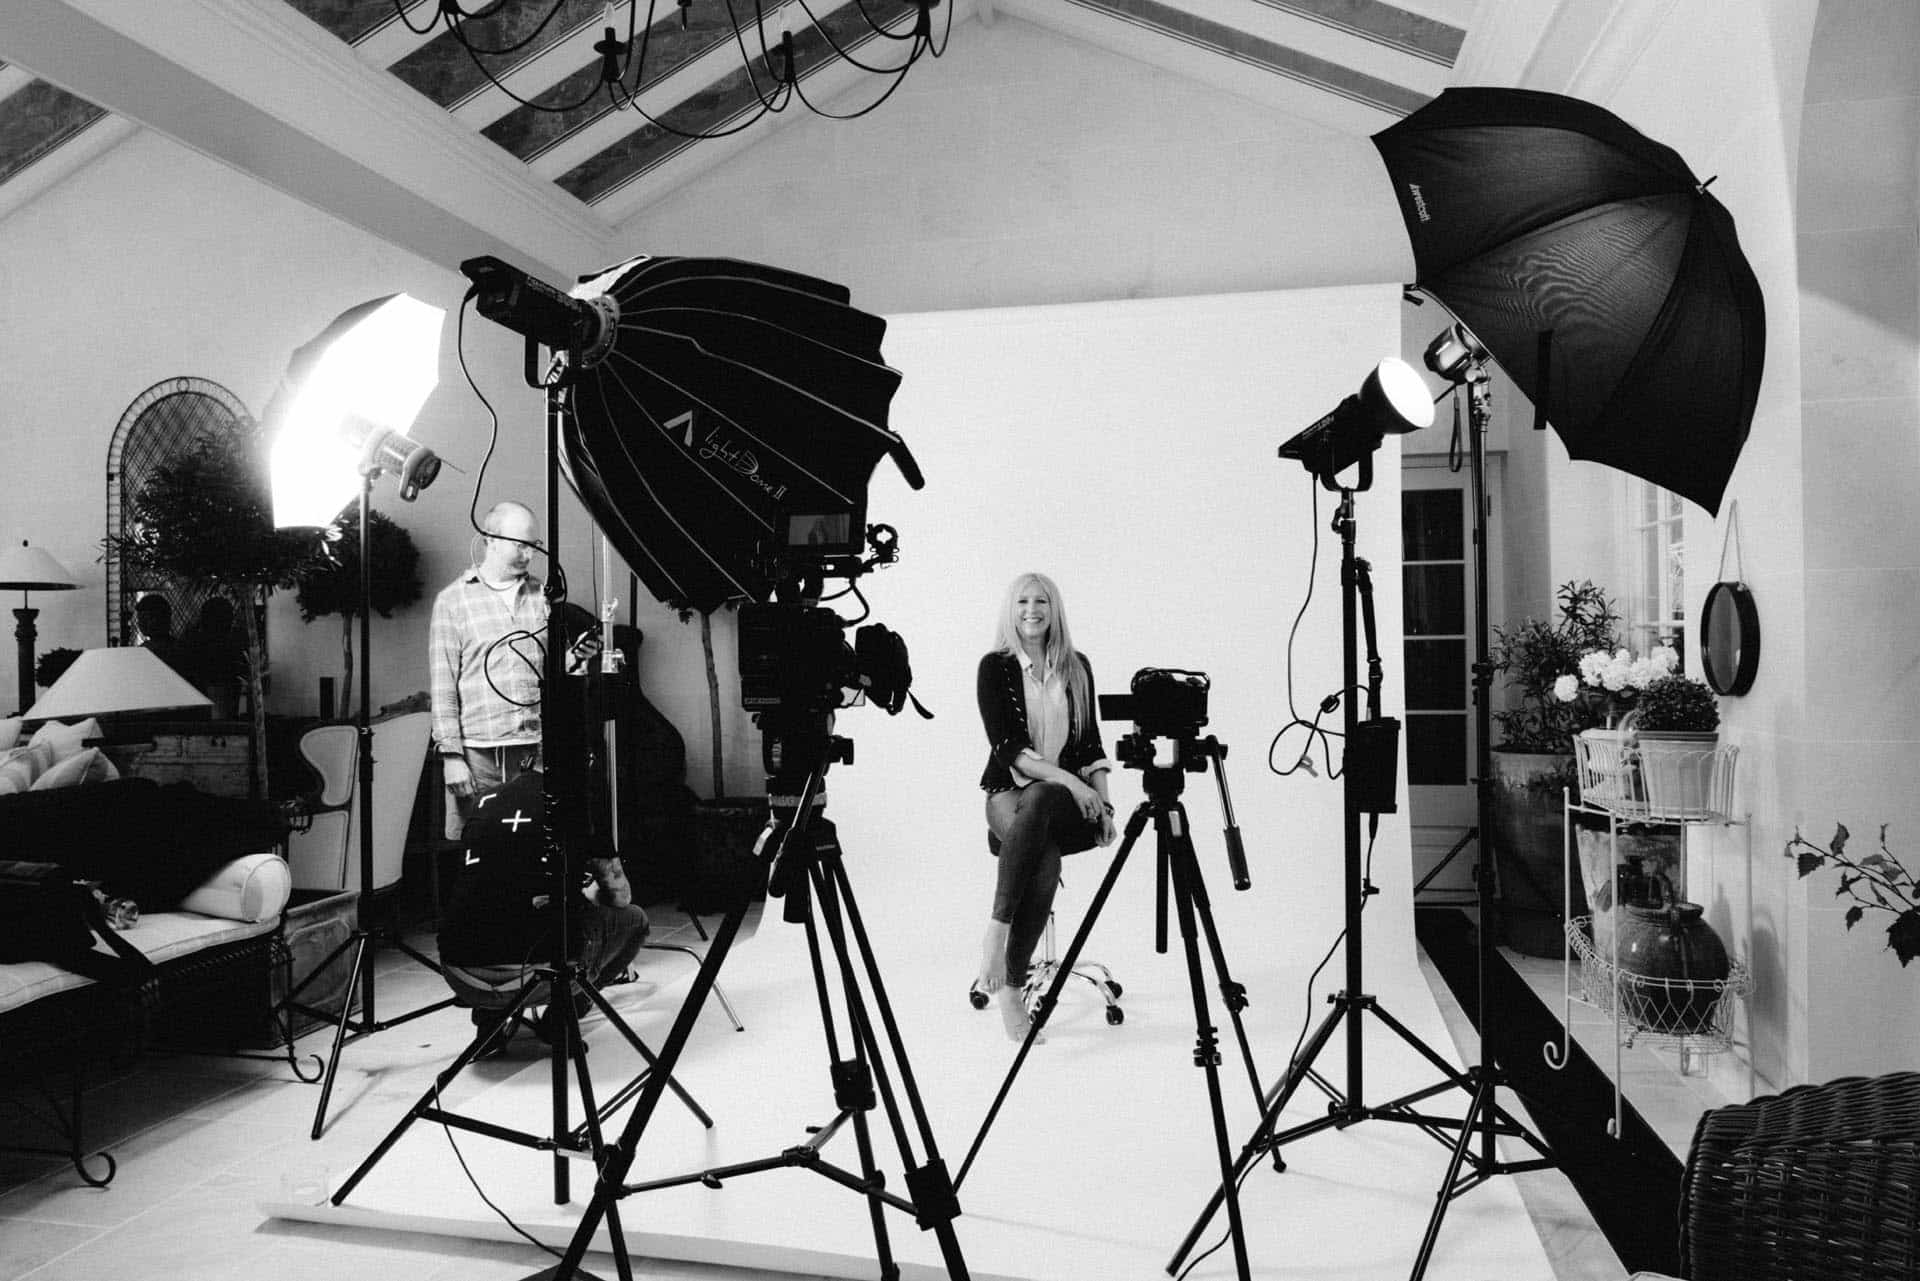 Photography & Video Setup with Sarah Cilliers from The Observatory - Oliver contracted by Observatory to create business portraits and lighting for video interviews